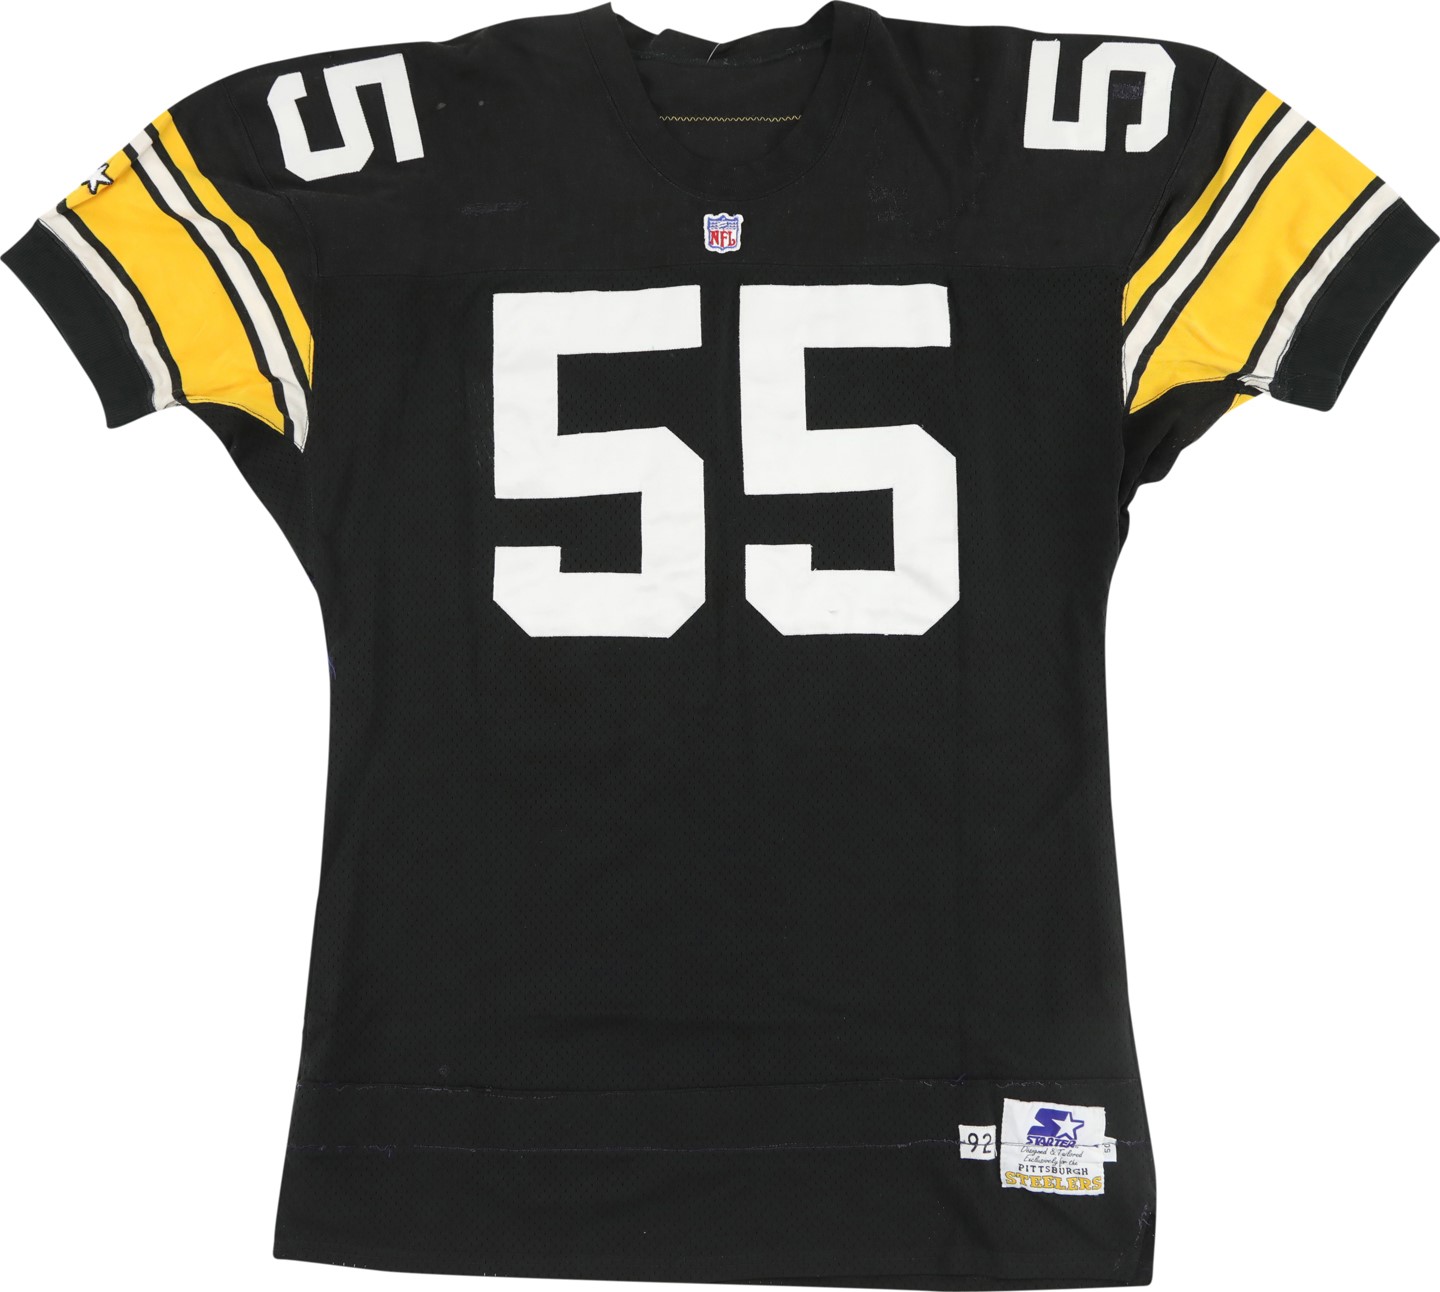 The Pittsburgh Steelers Game Worn Jersey Archive - 1992 Jerry Olsavsky Game Worn Pittsburgh Steelers Jersey